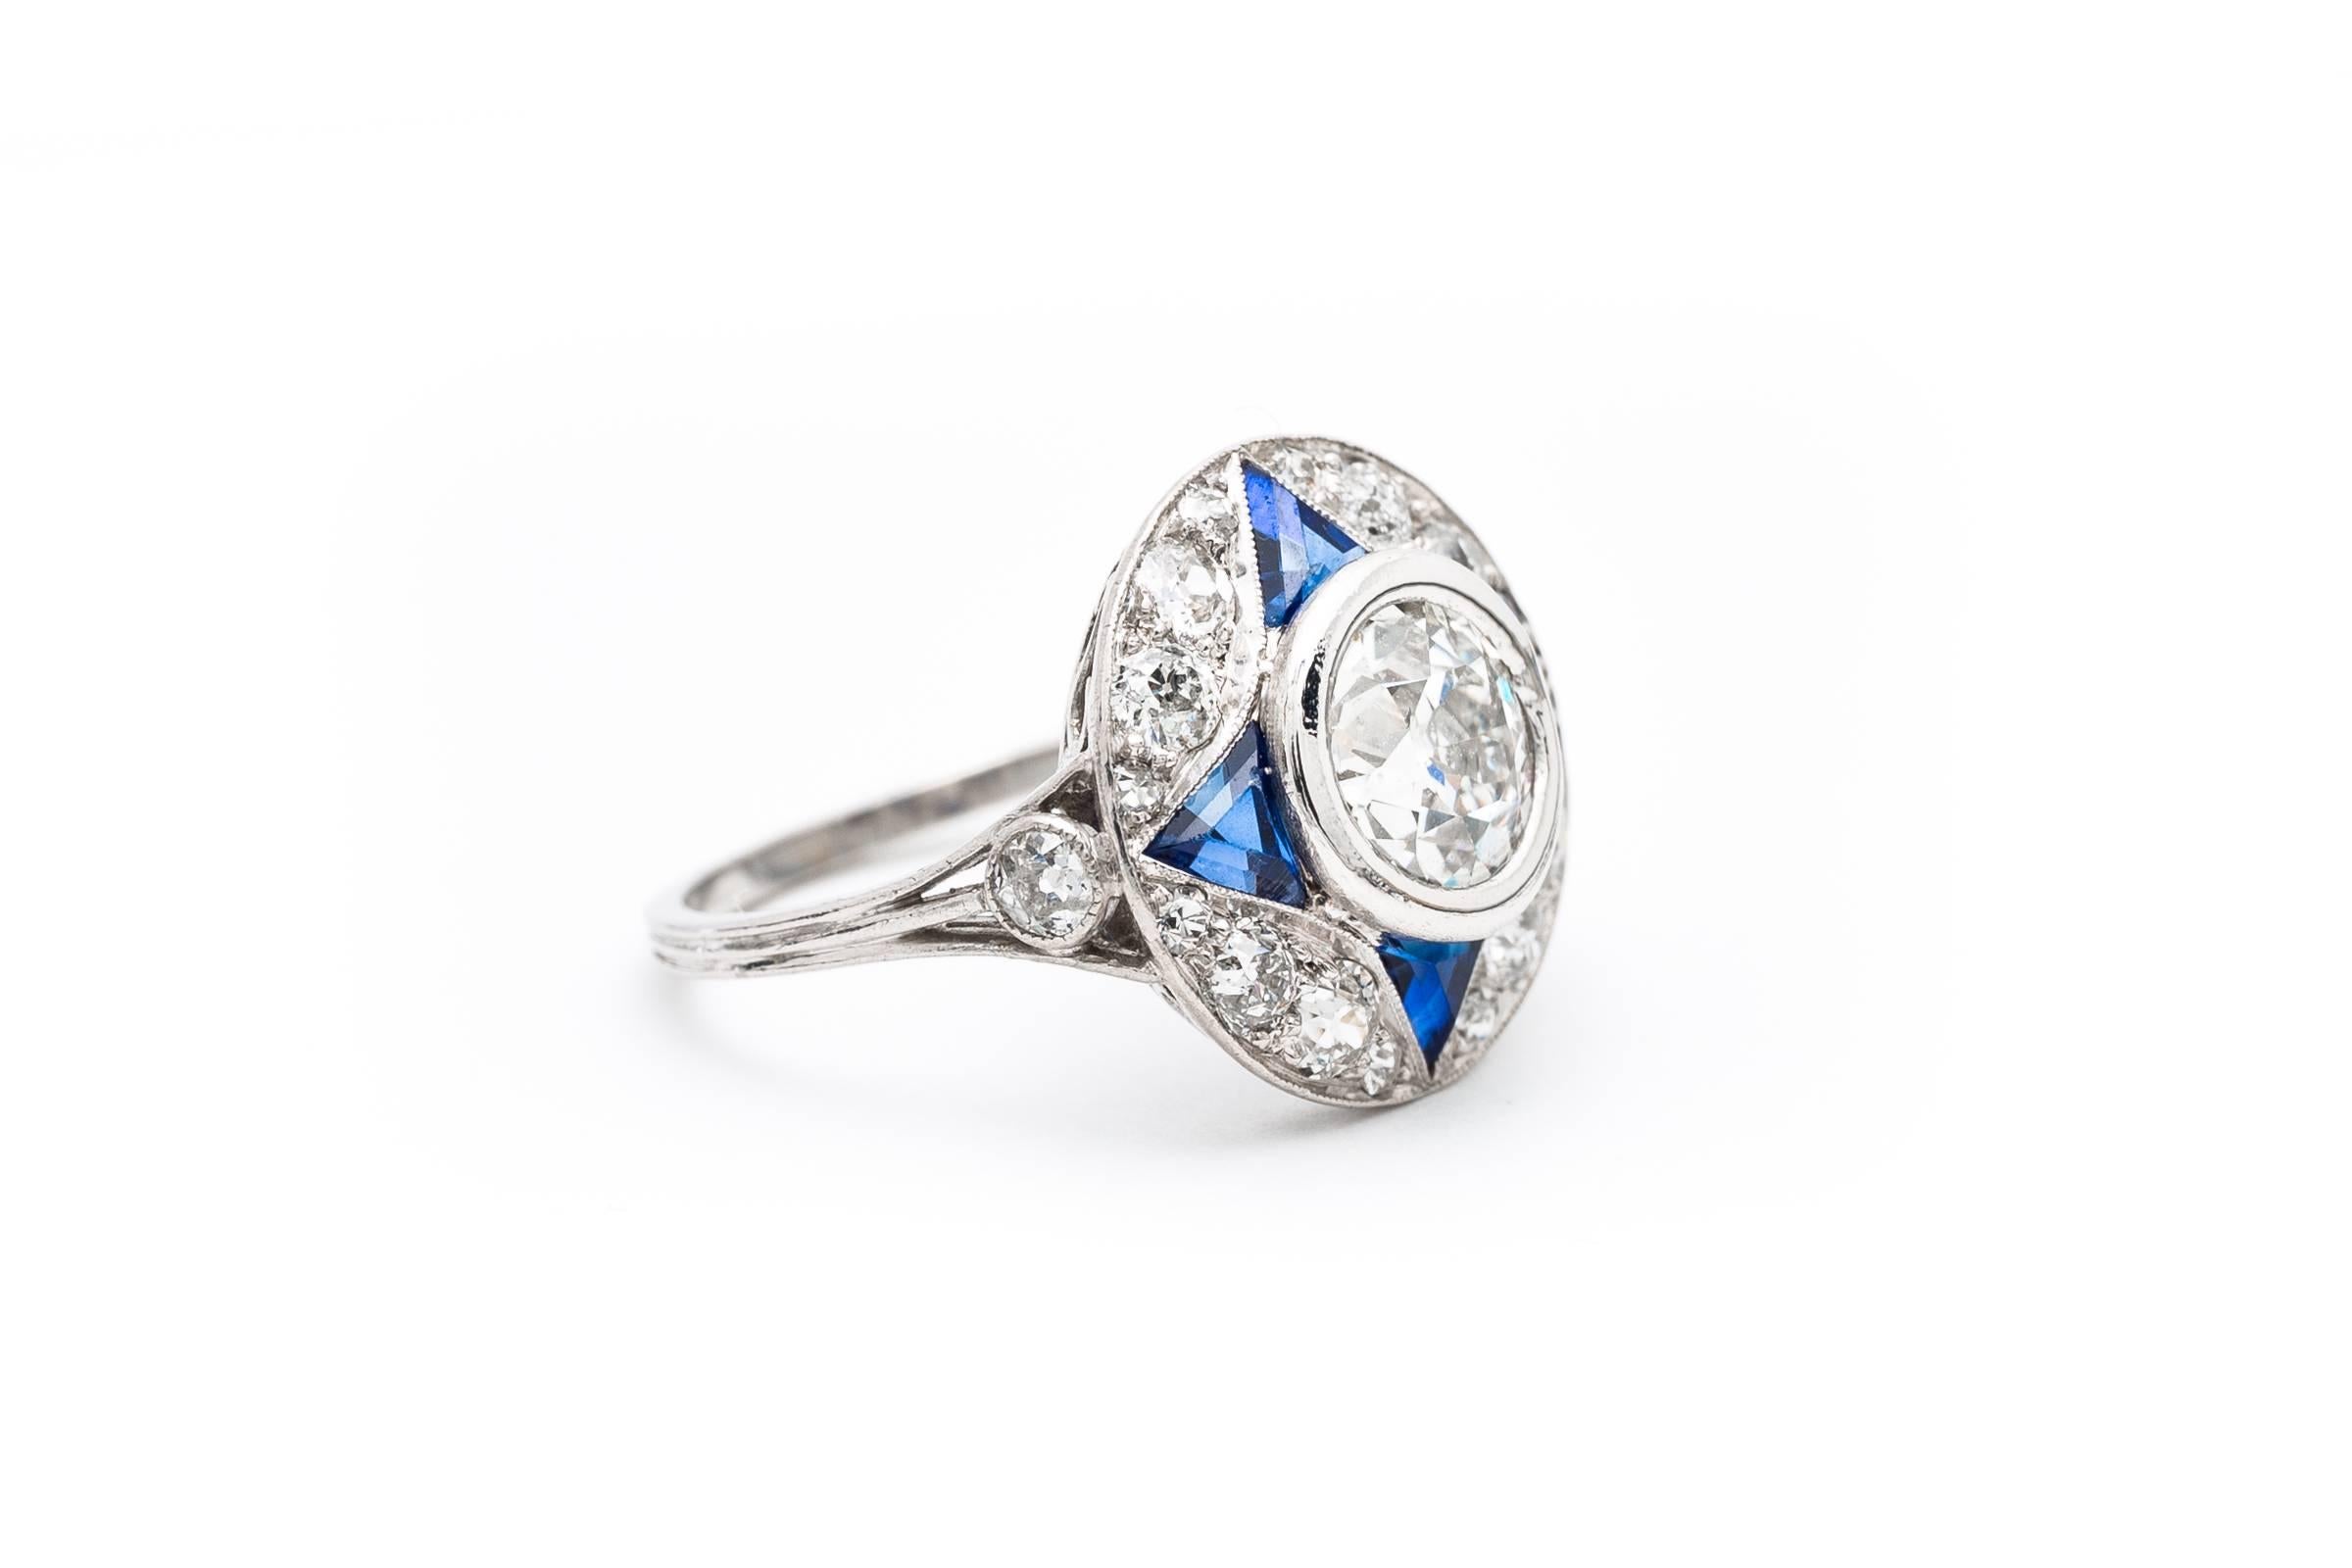 A stunning art deco period diamond and sapphire engagement ring in platinum. Centered by a gorgeous 1.18 carat old european cut center diamond, this ring features accenting French cut sapphires in a spectacular hand crafted platinum